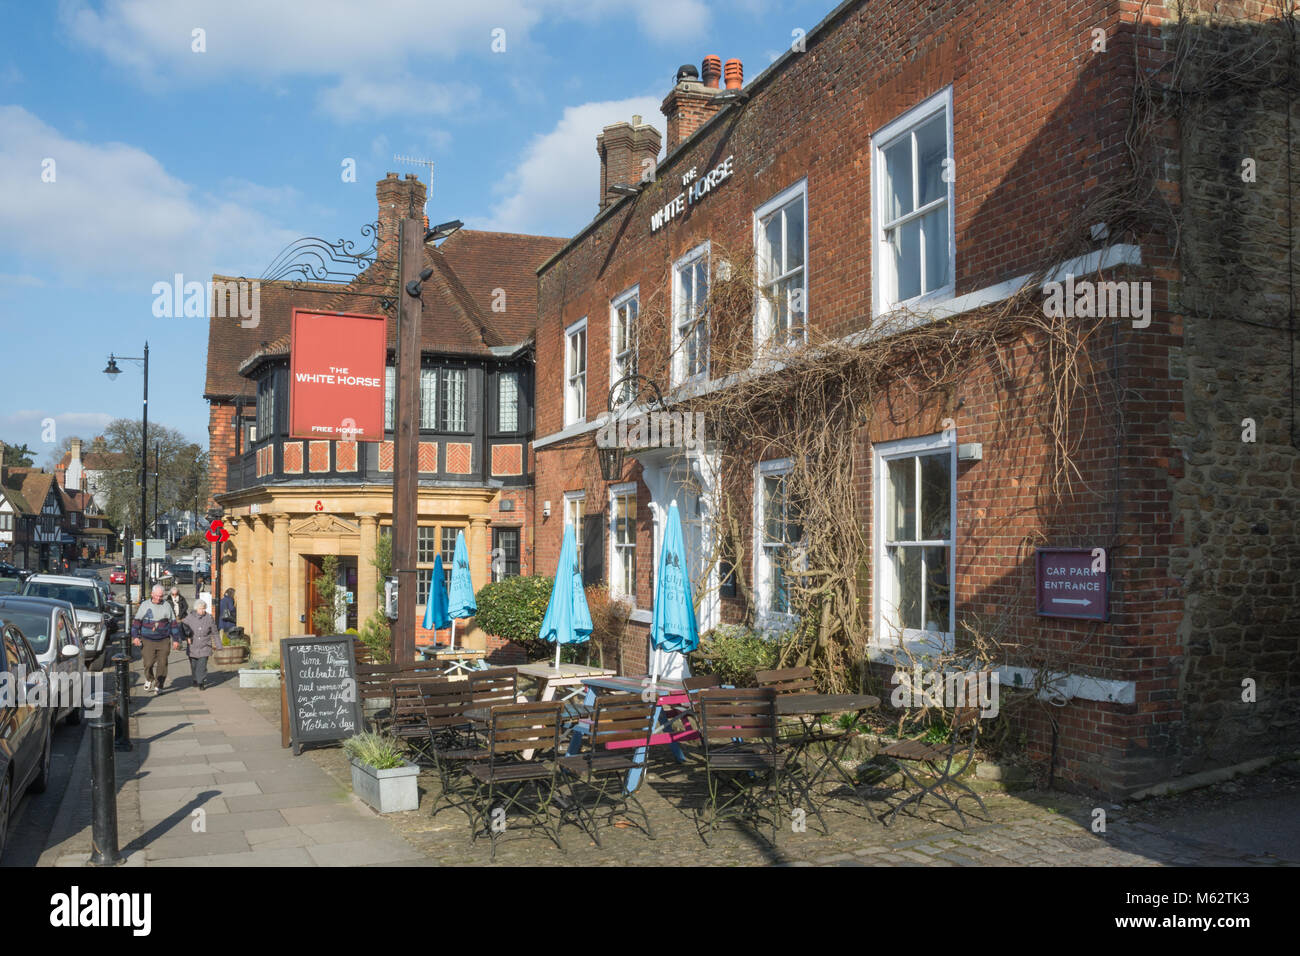 The High Street in Haslemere town centre, Surrey, UK Stock Photo